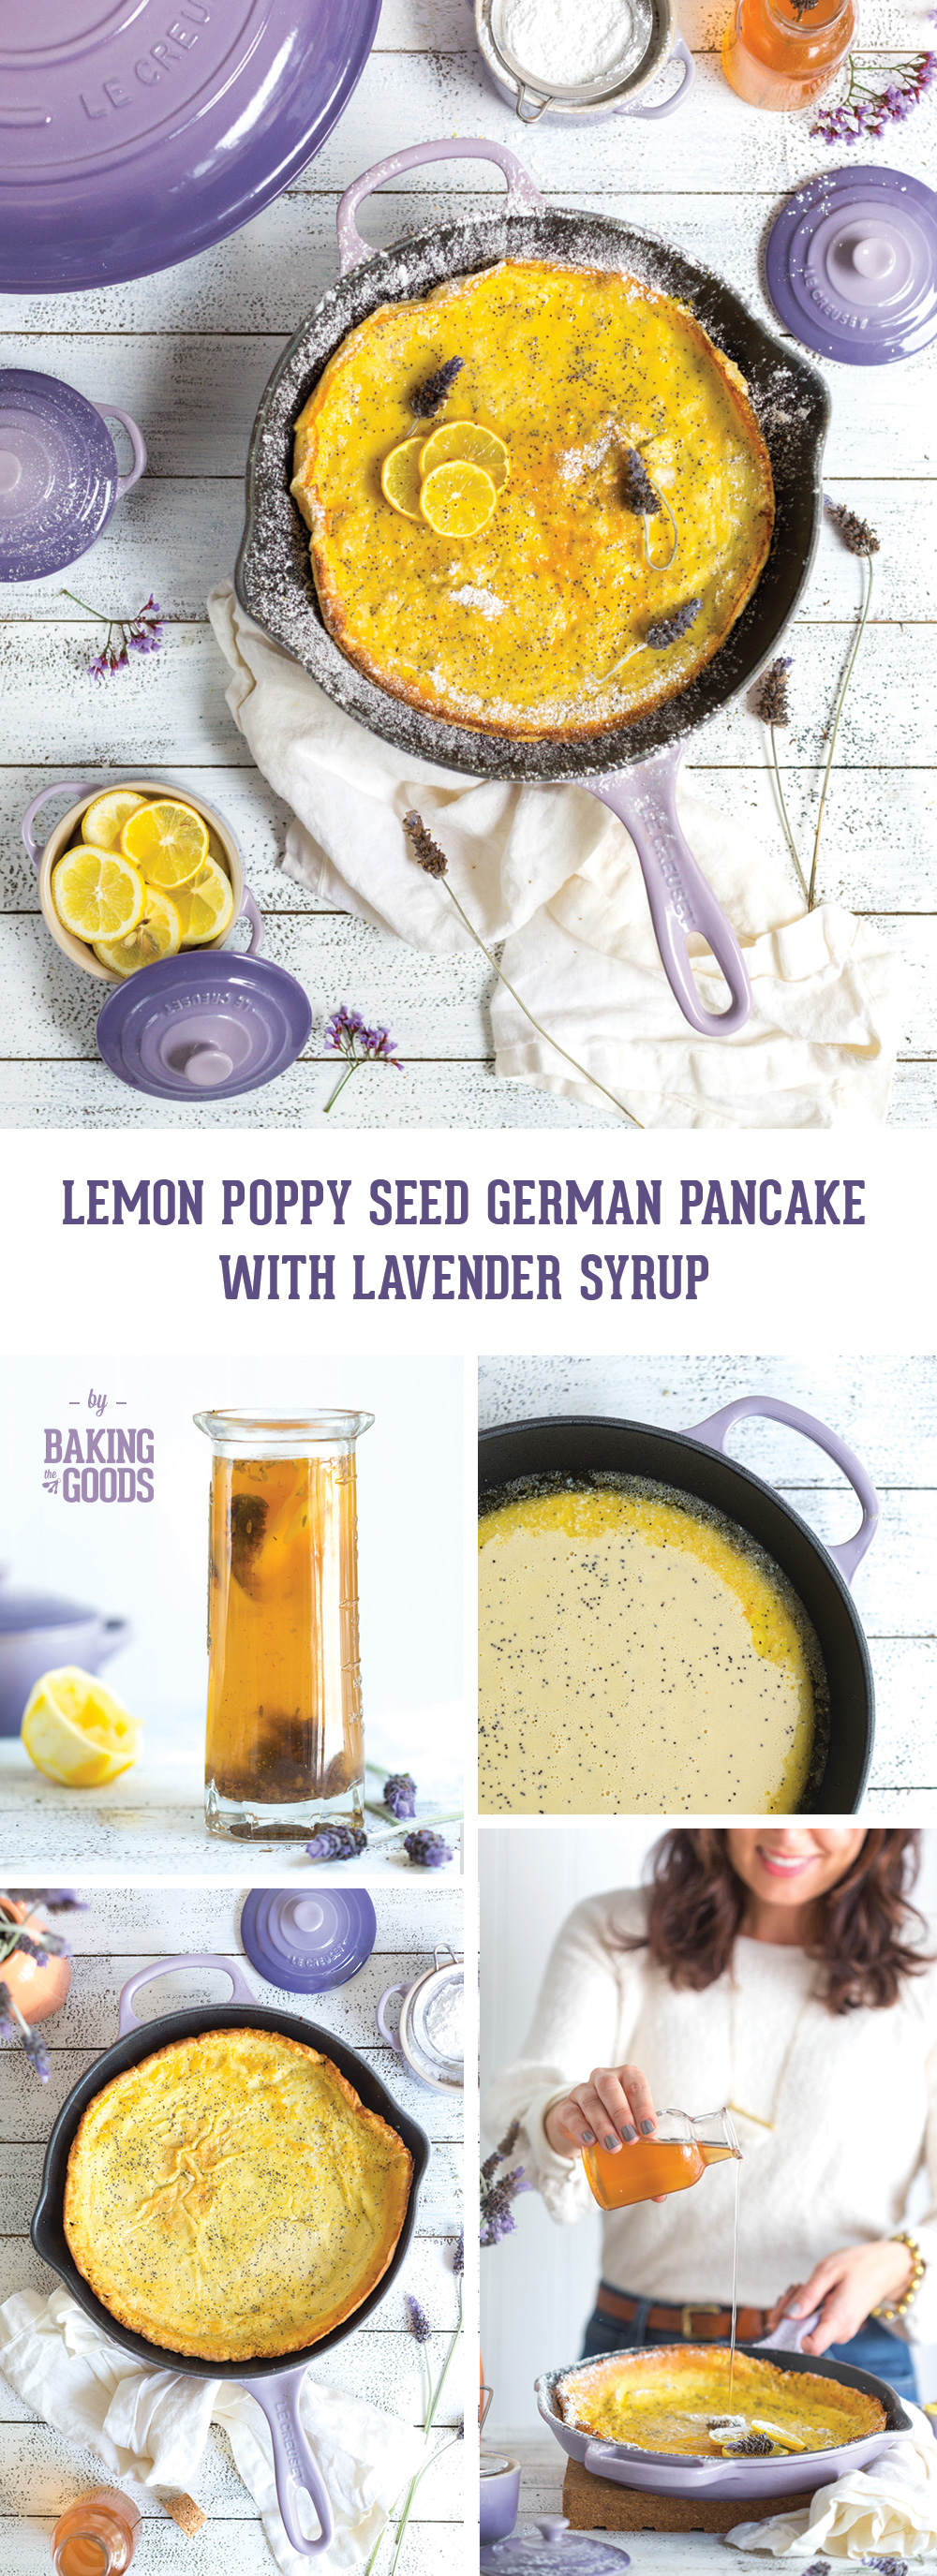 Lemon Poppy Seed German Pancake with Lavender Syrup by Baking The Goods